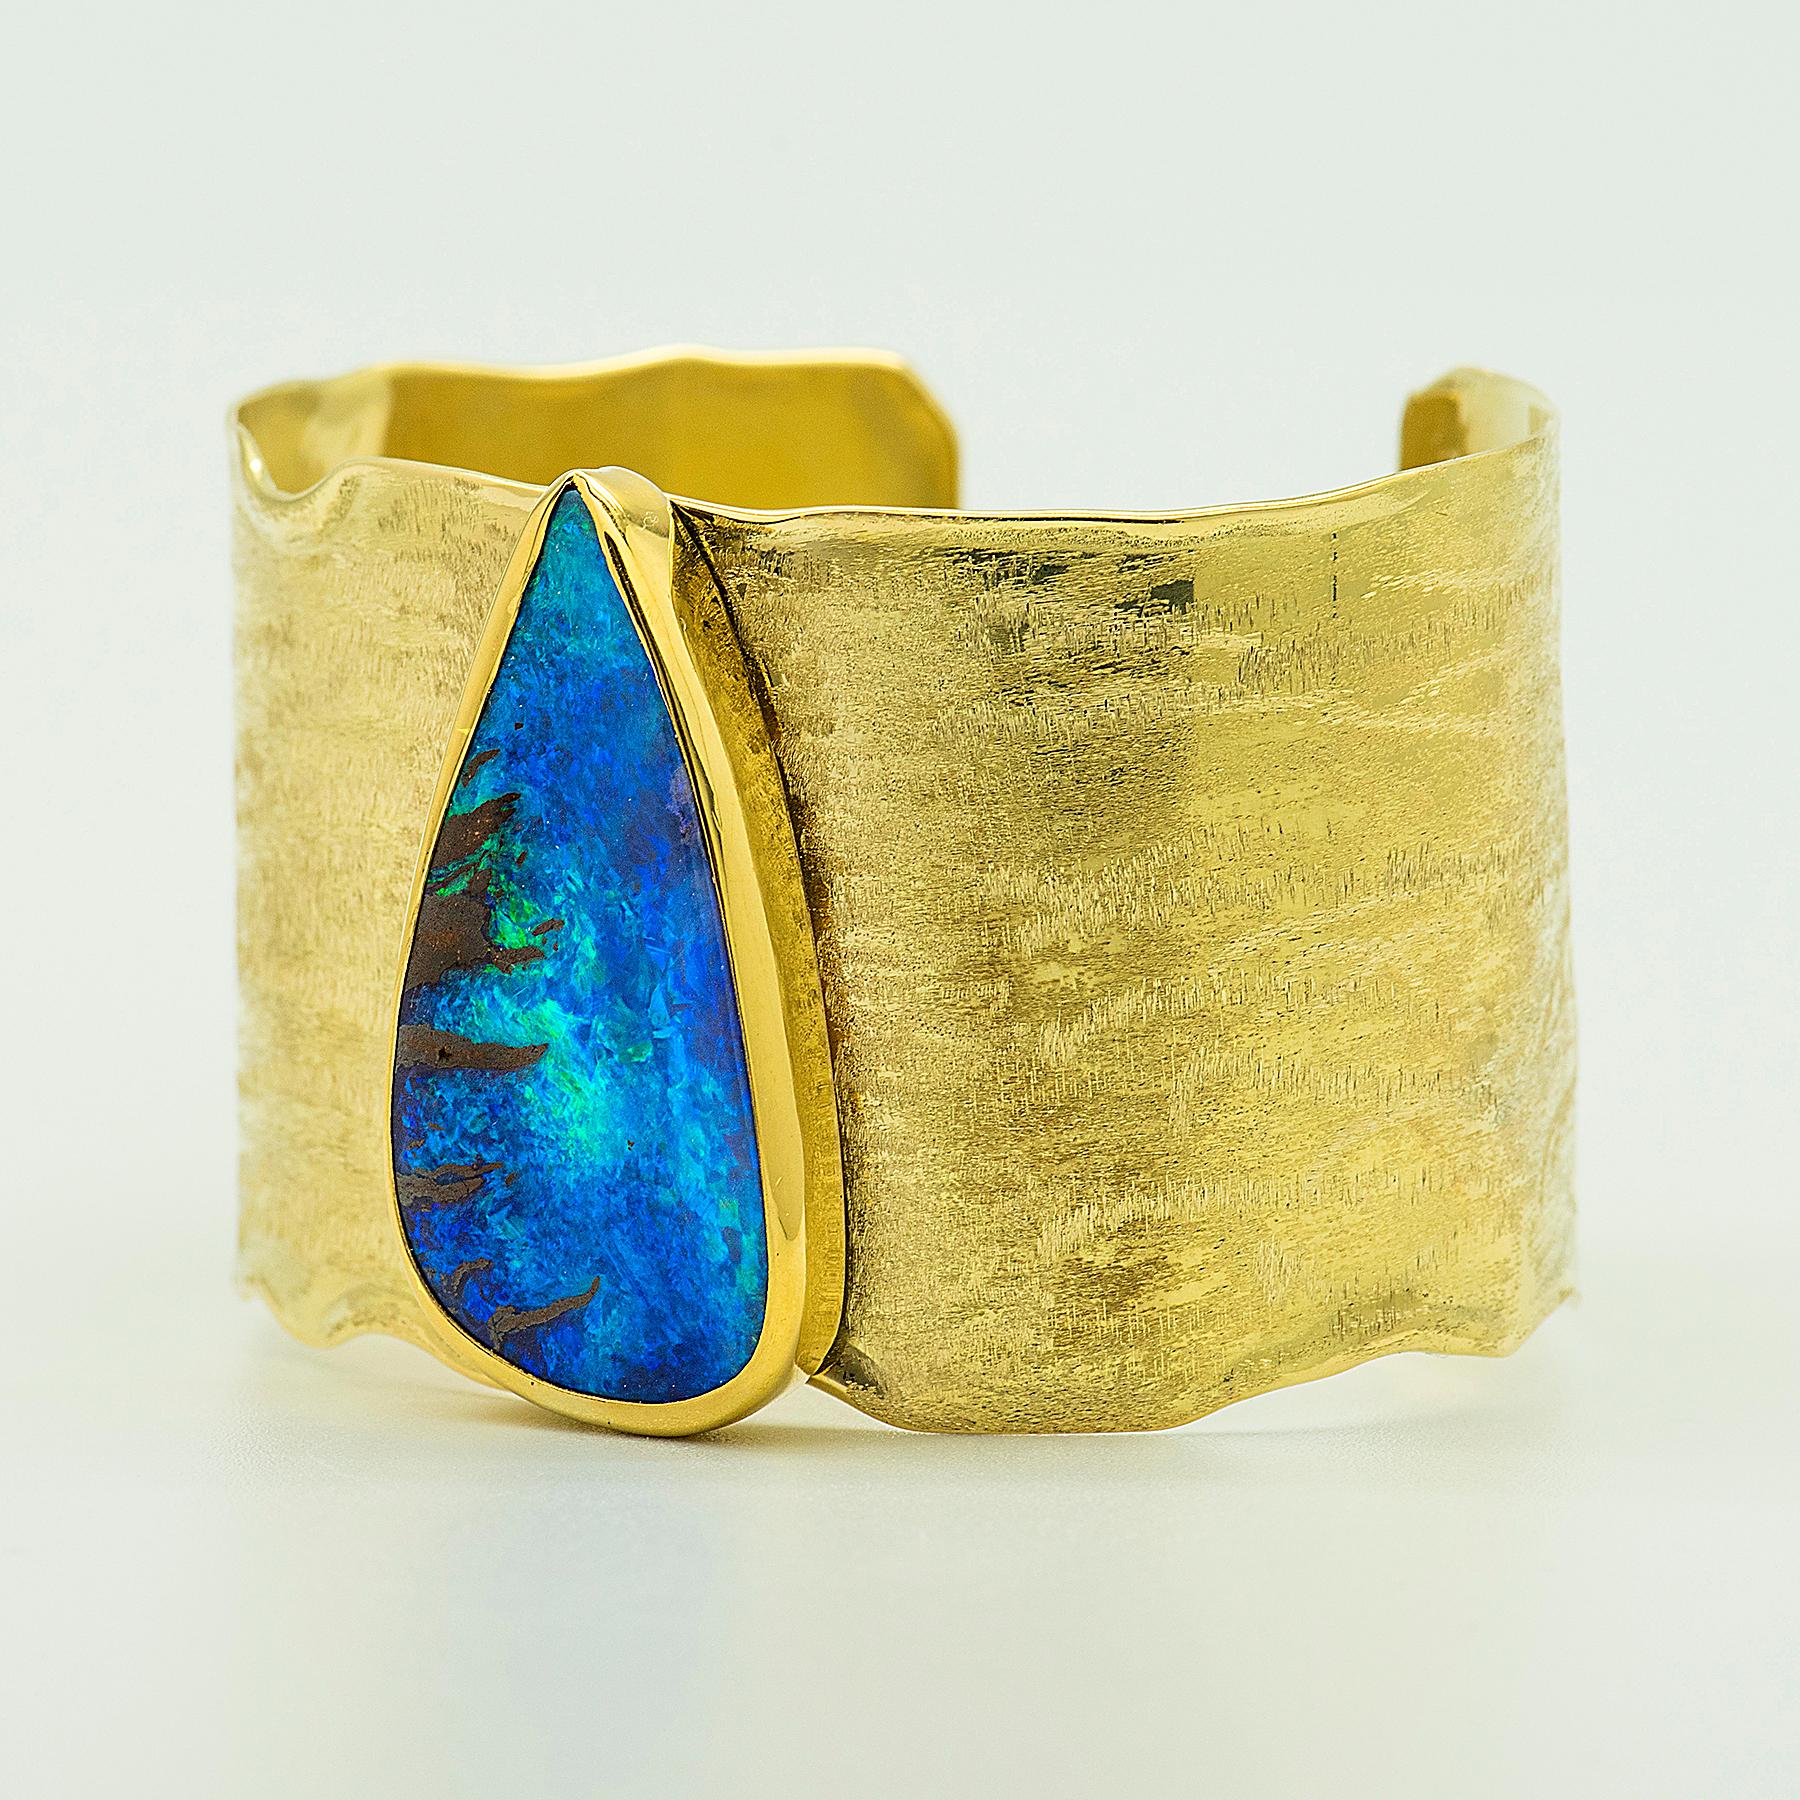 Boulder opal cuff bracelet in 22k gold and 18k gold.  Boulder opal is from Queensland, Australia primarily from the Winton area.  This blue green boulder opal is a classic color,  the chocolate matrix displaying a pattern on the left like a big cat